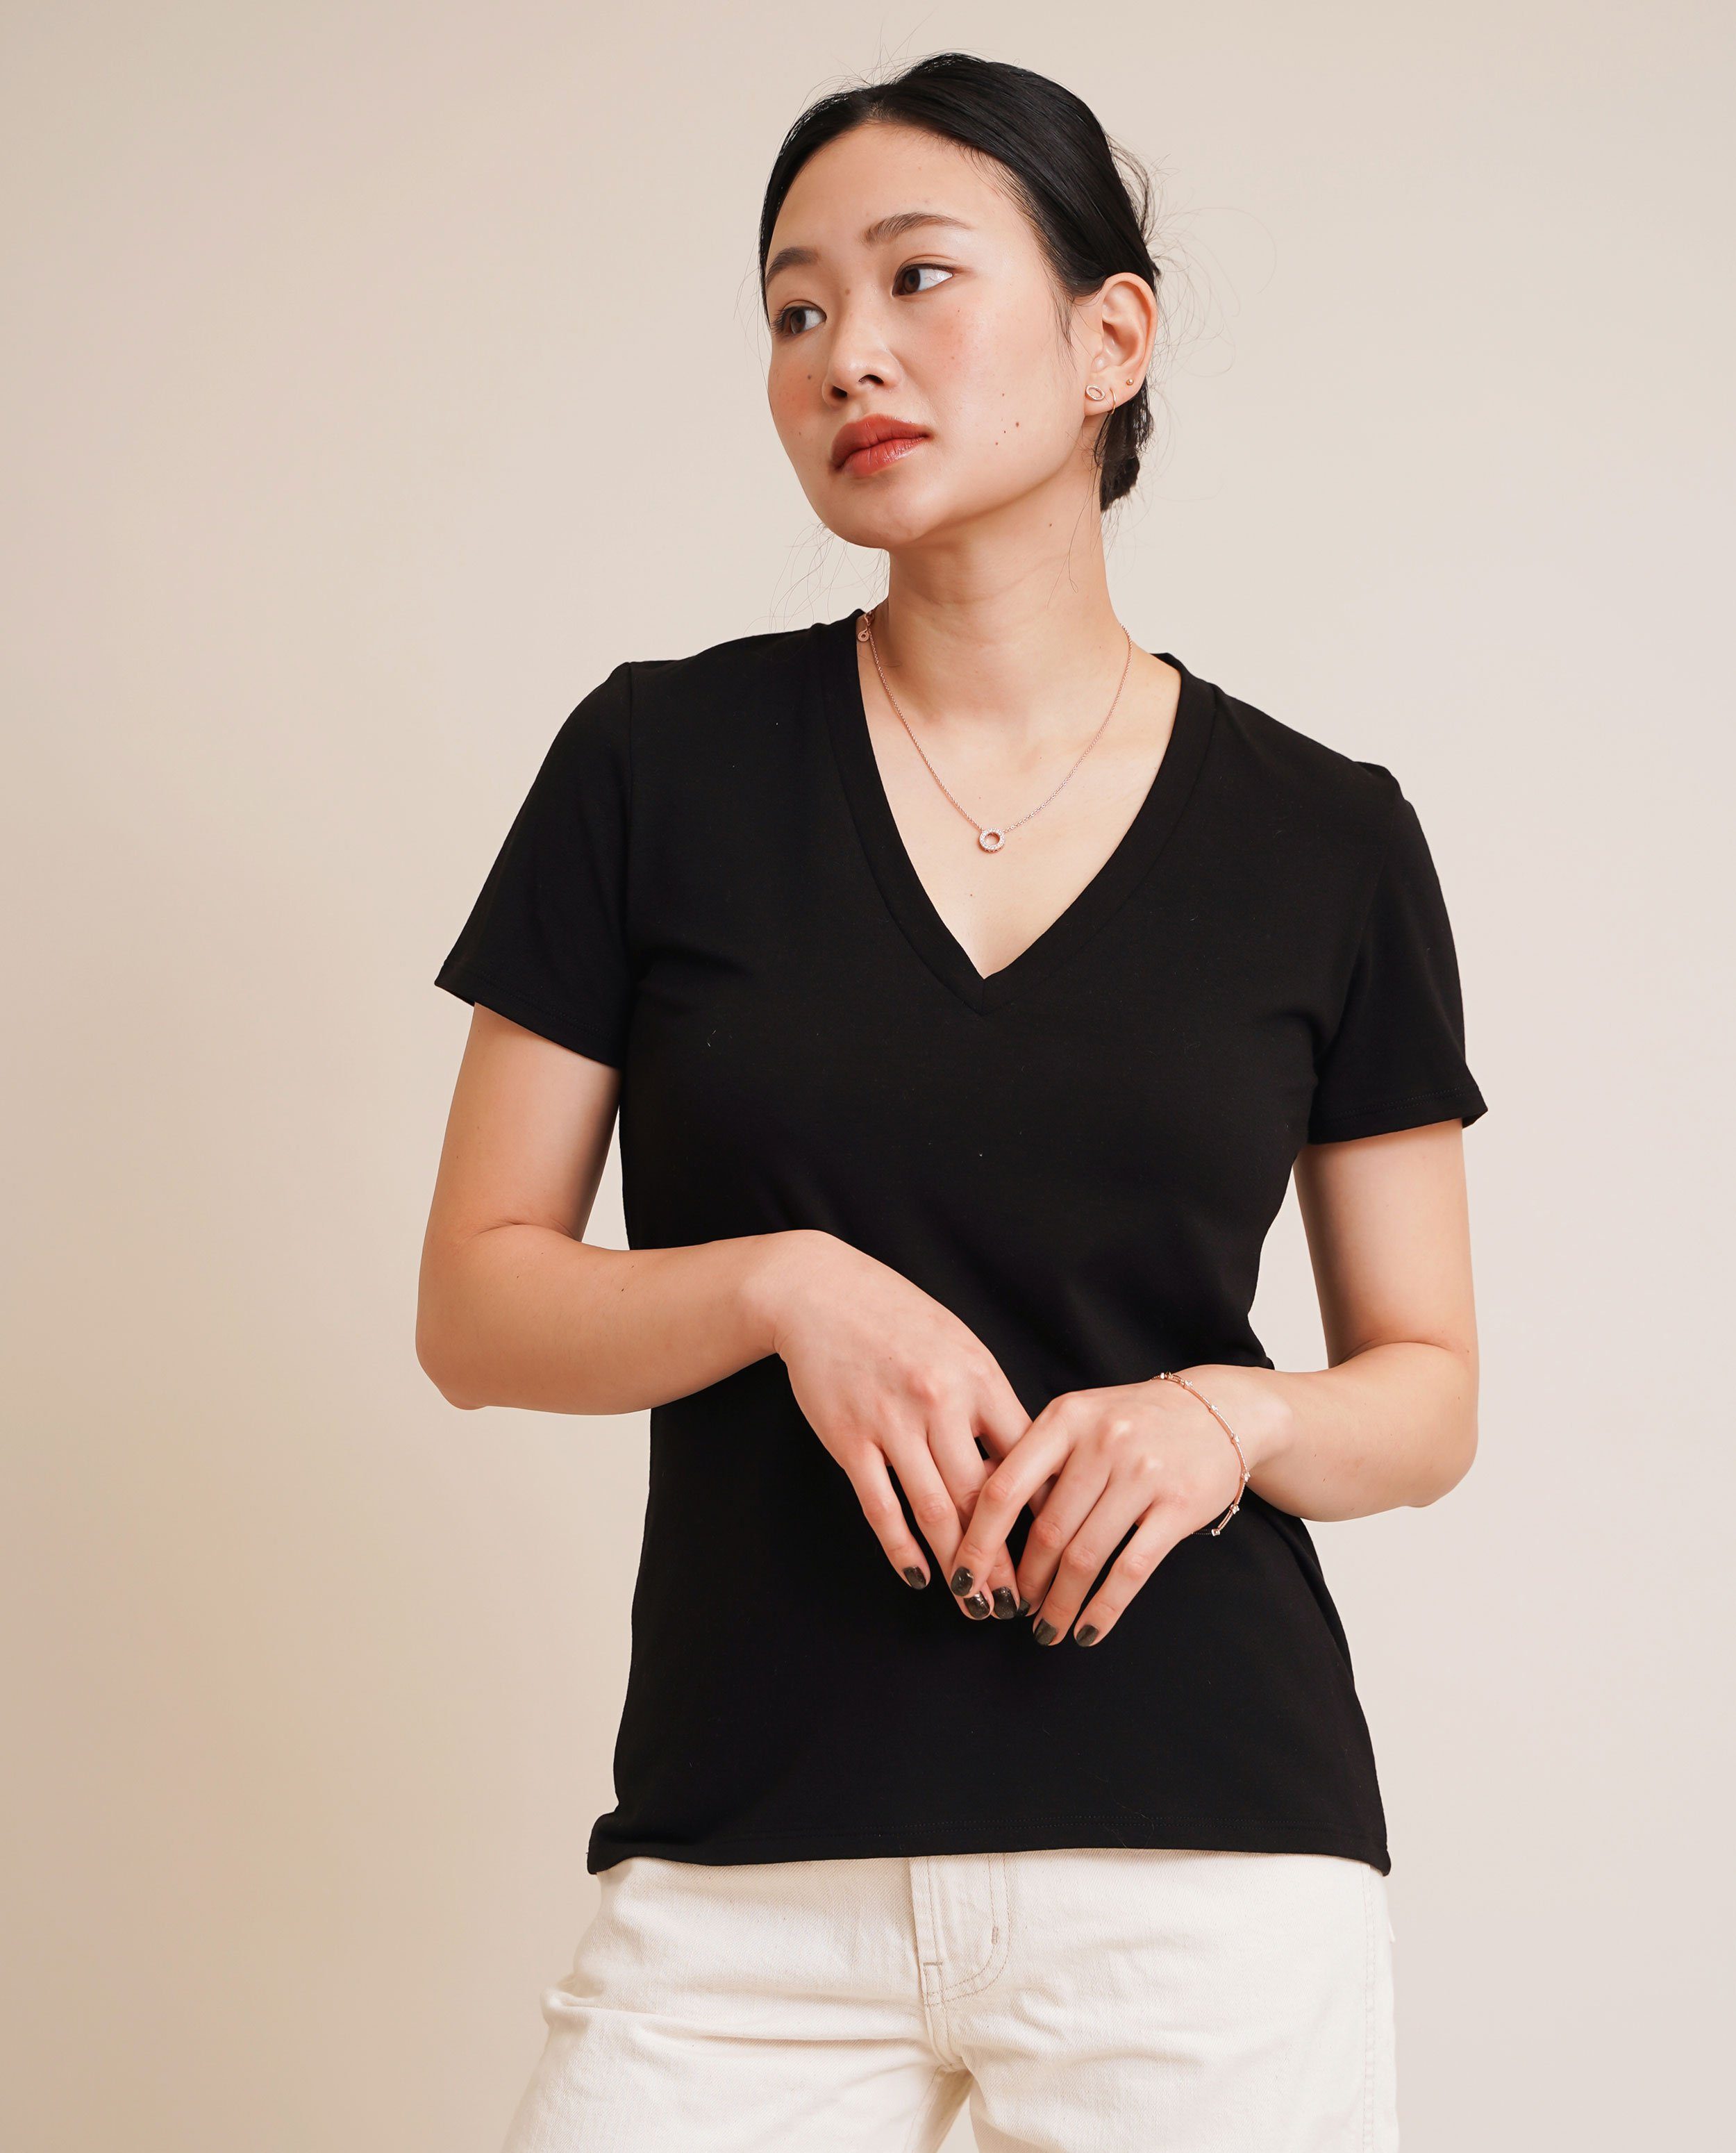 The V-Neck Tee in Black | FRANC Sustainable Clothing